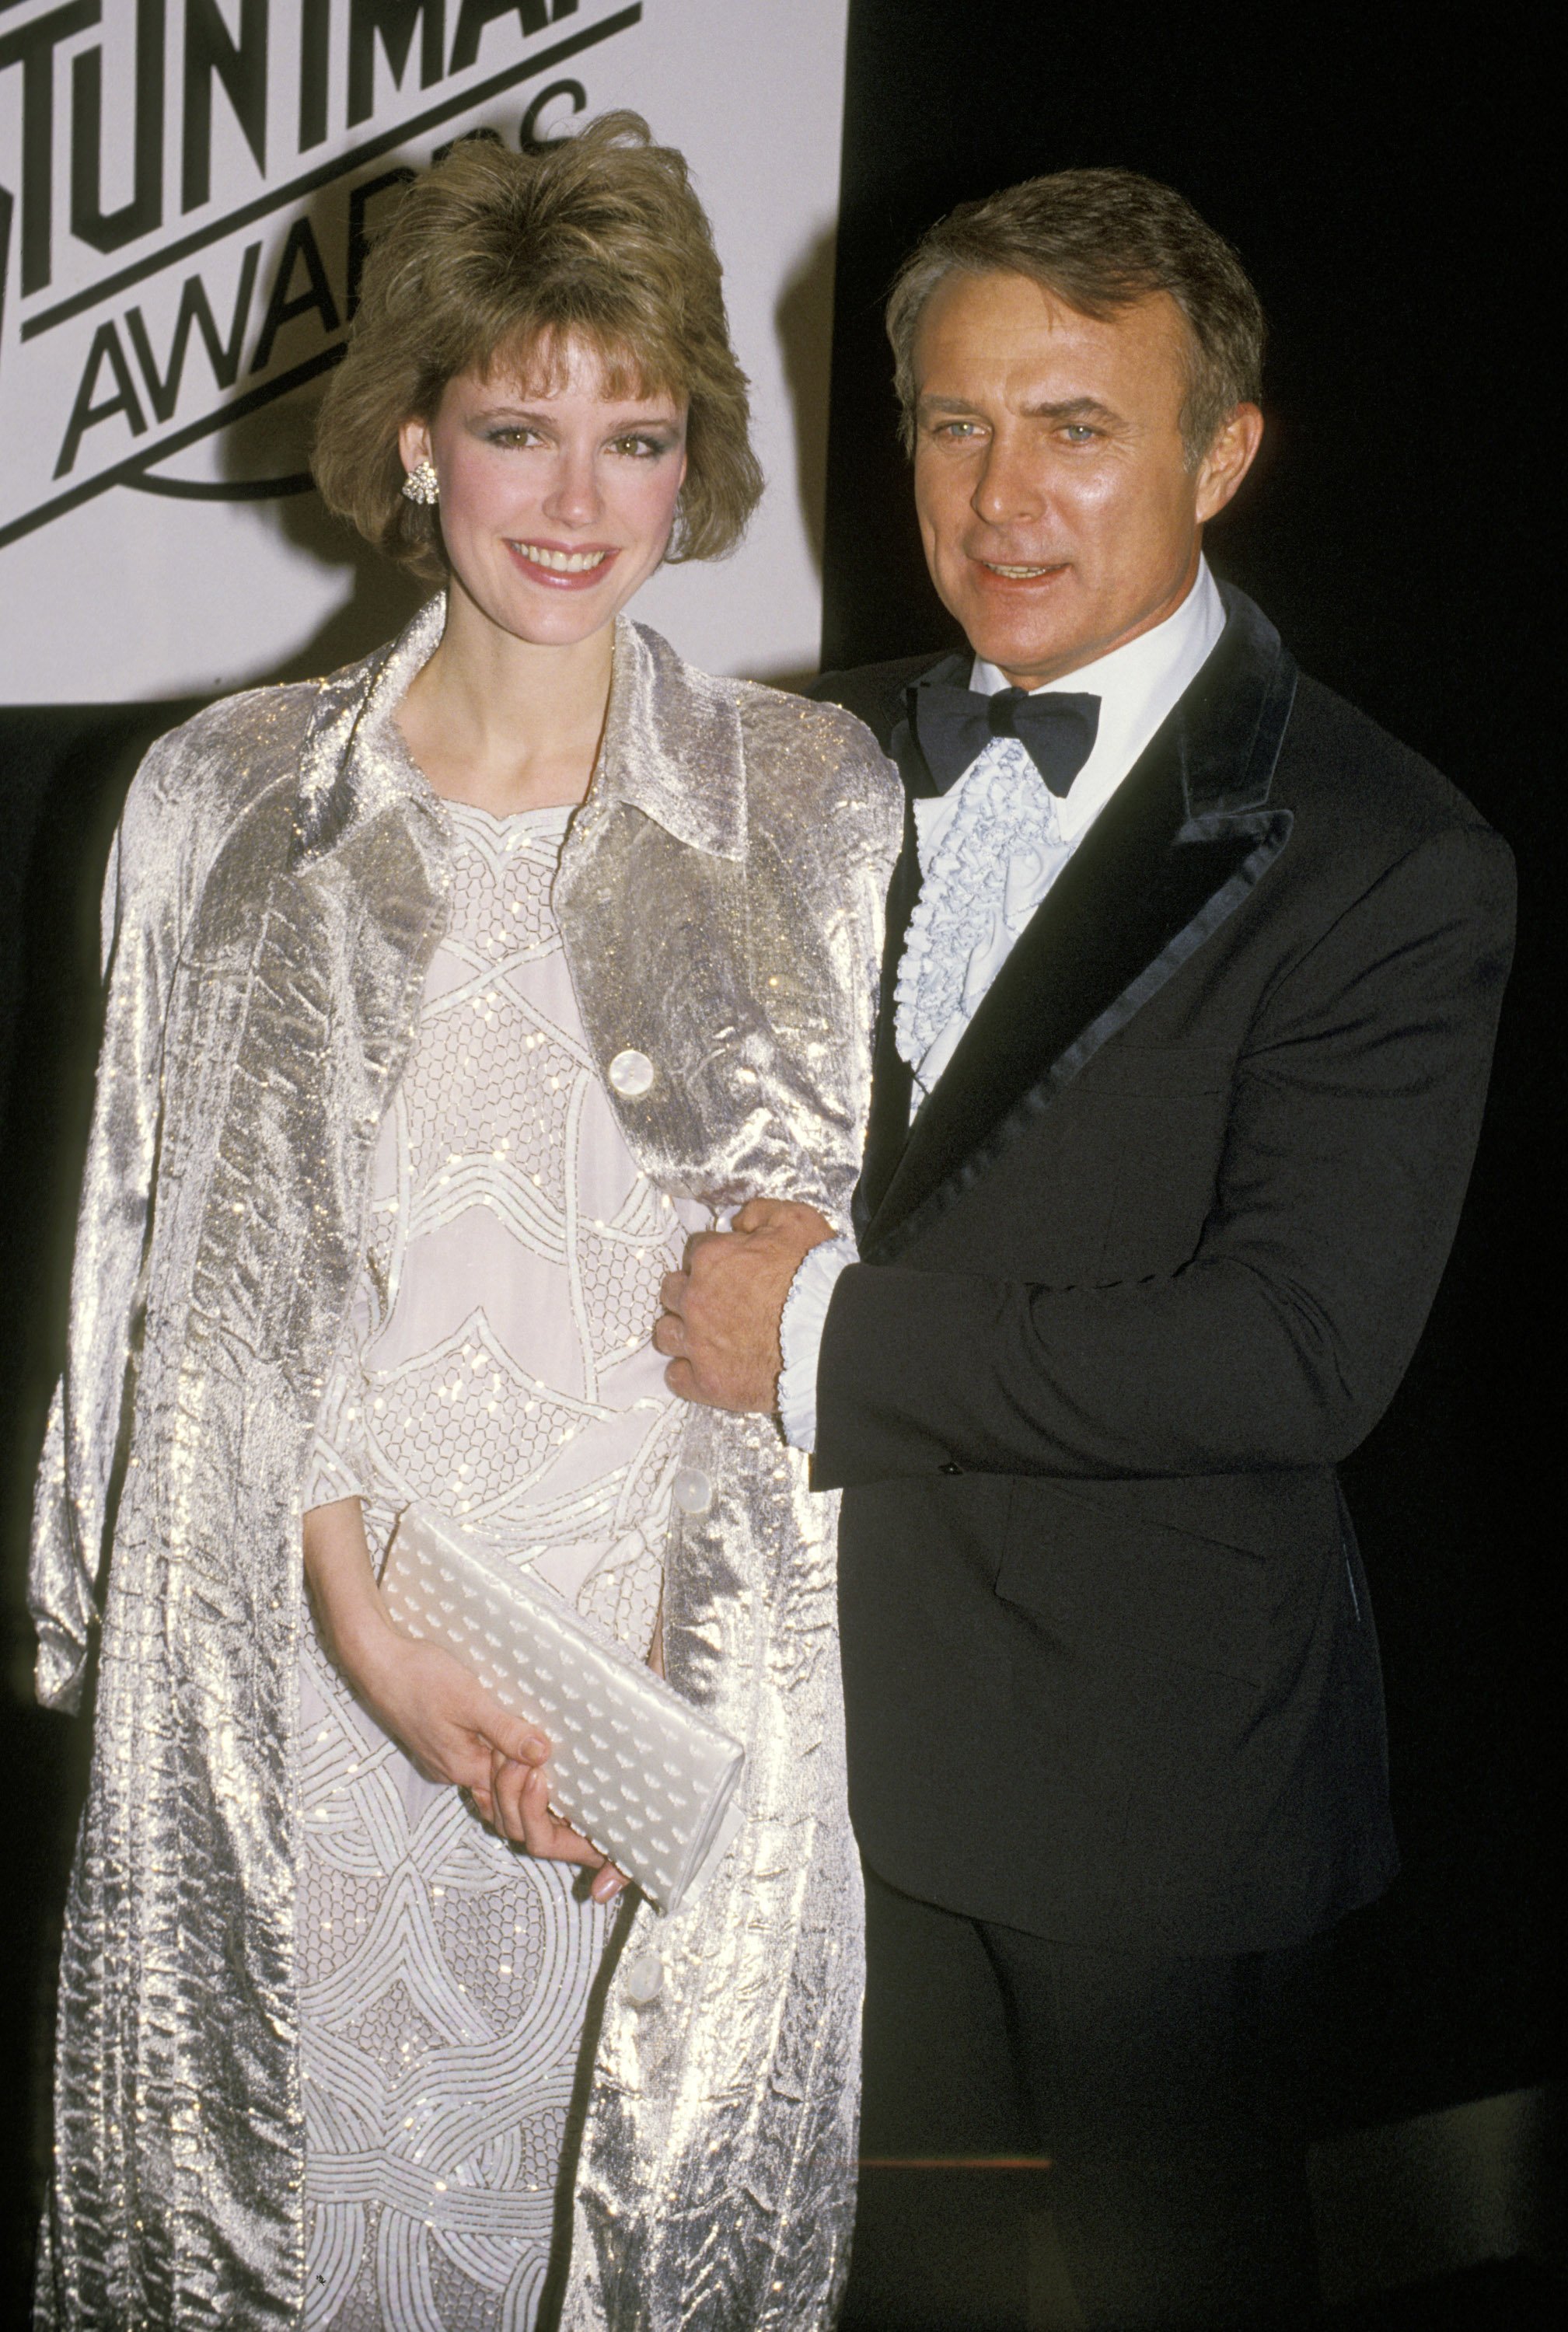 LaVelda Fann and Robert Conrad during 1st Annual Stuntman's Awards Show at KABC TV Studios in Los Angeles, California, United States. | Source: Getty Images